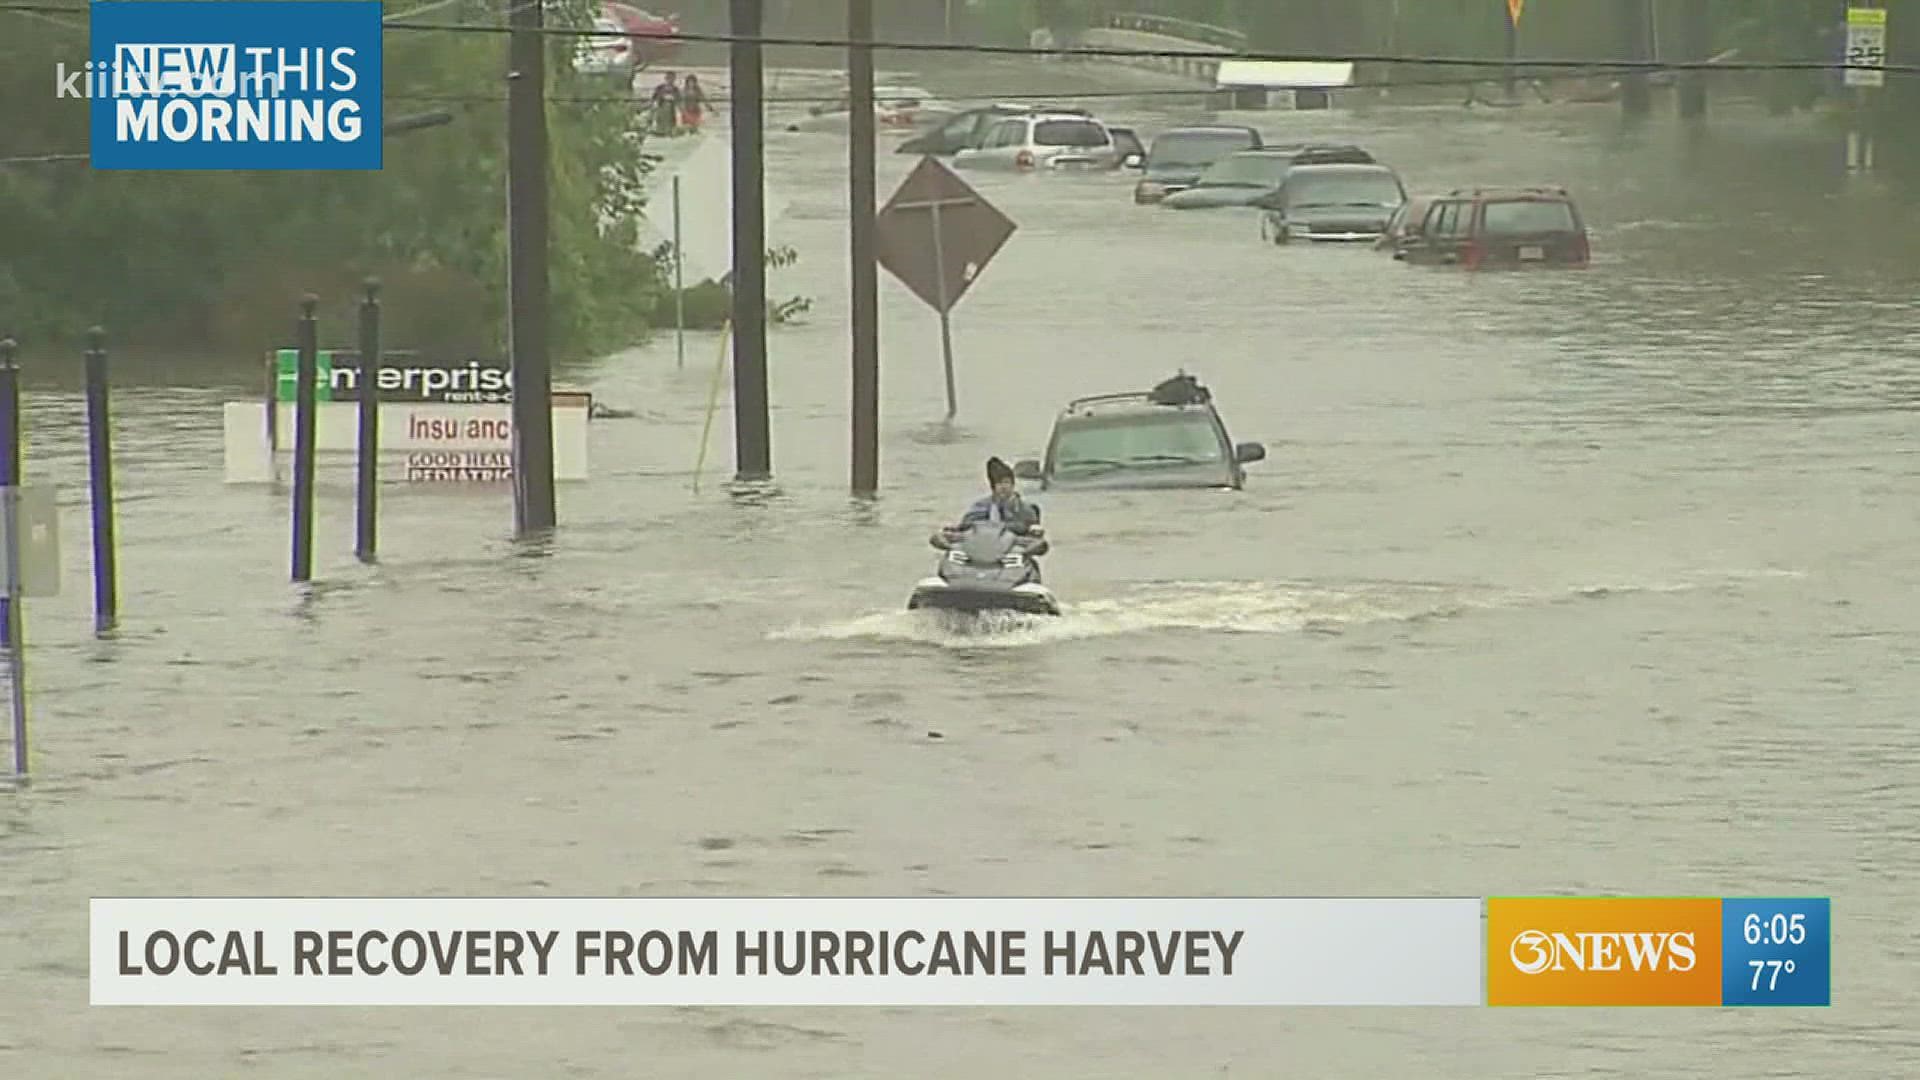 A look back at the impact Harvey had on local communities.